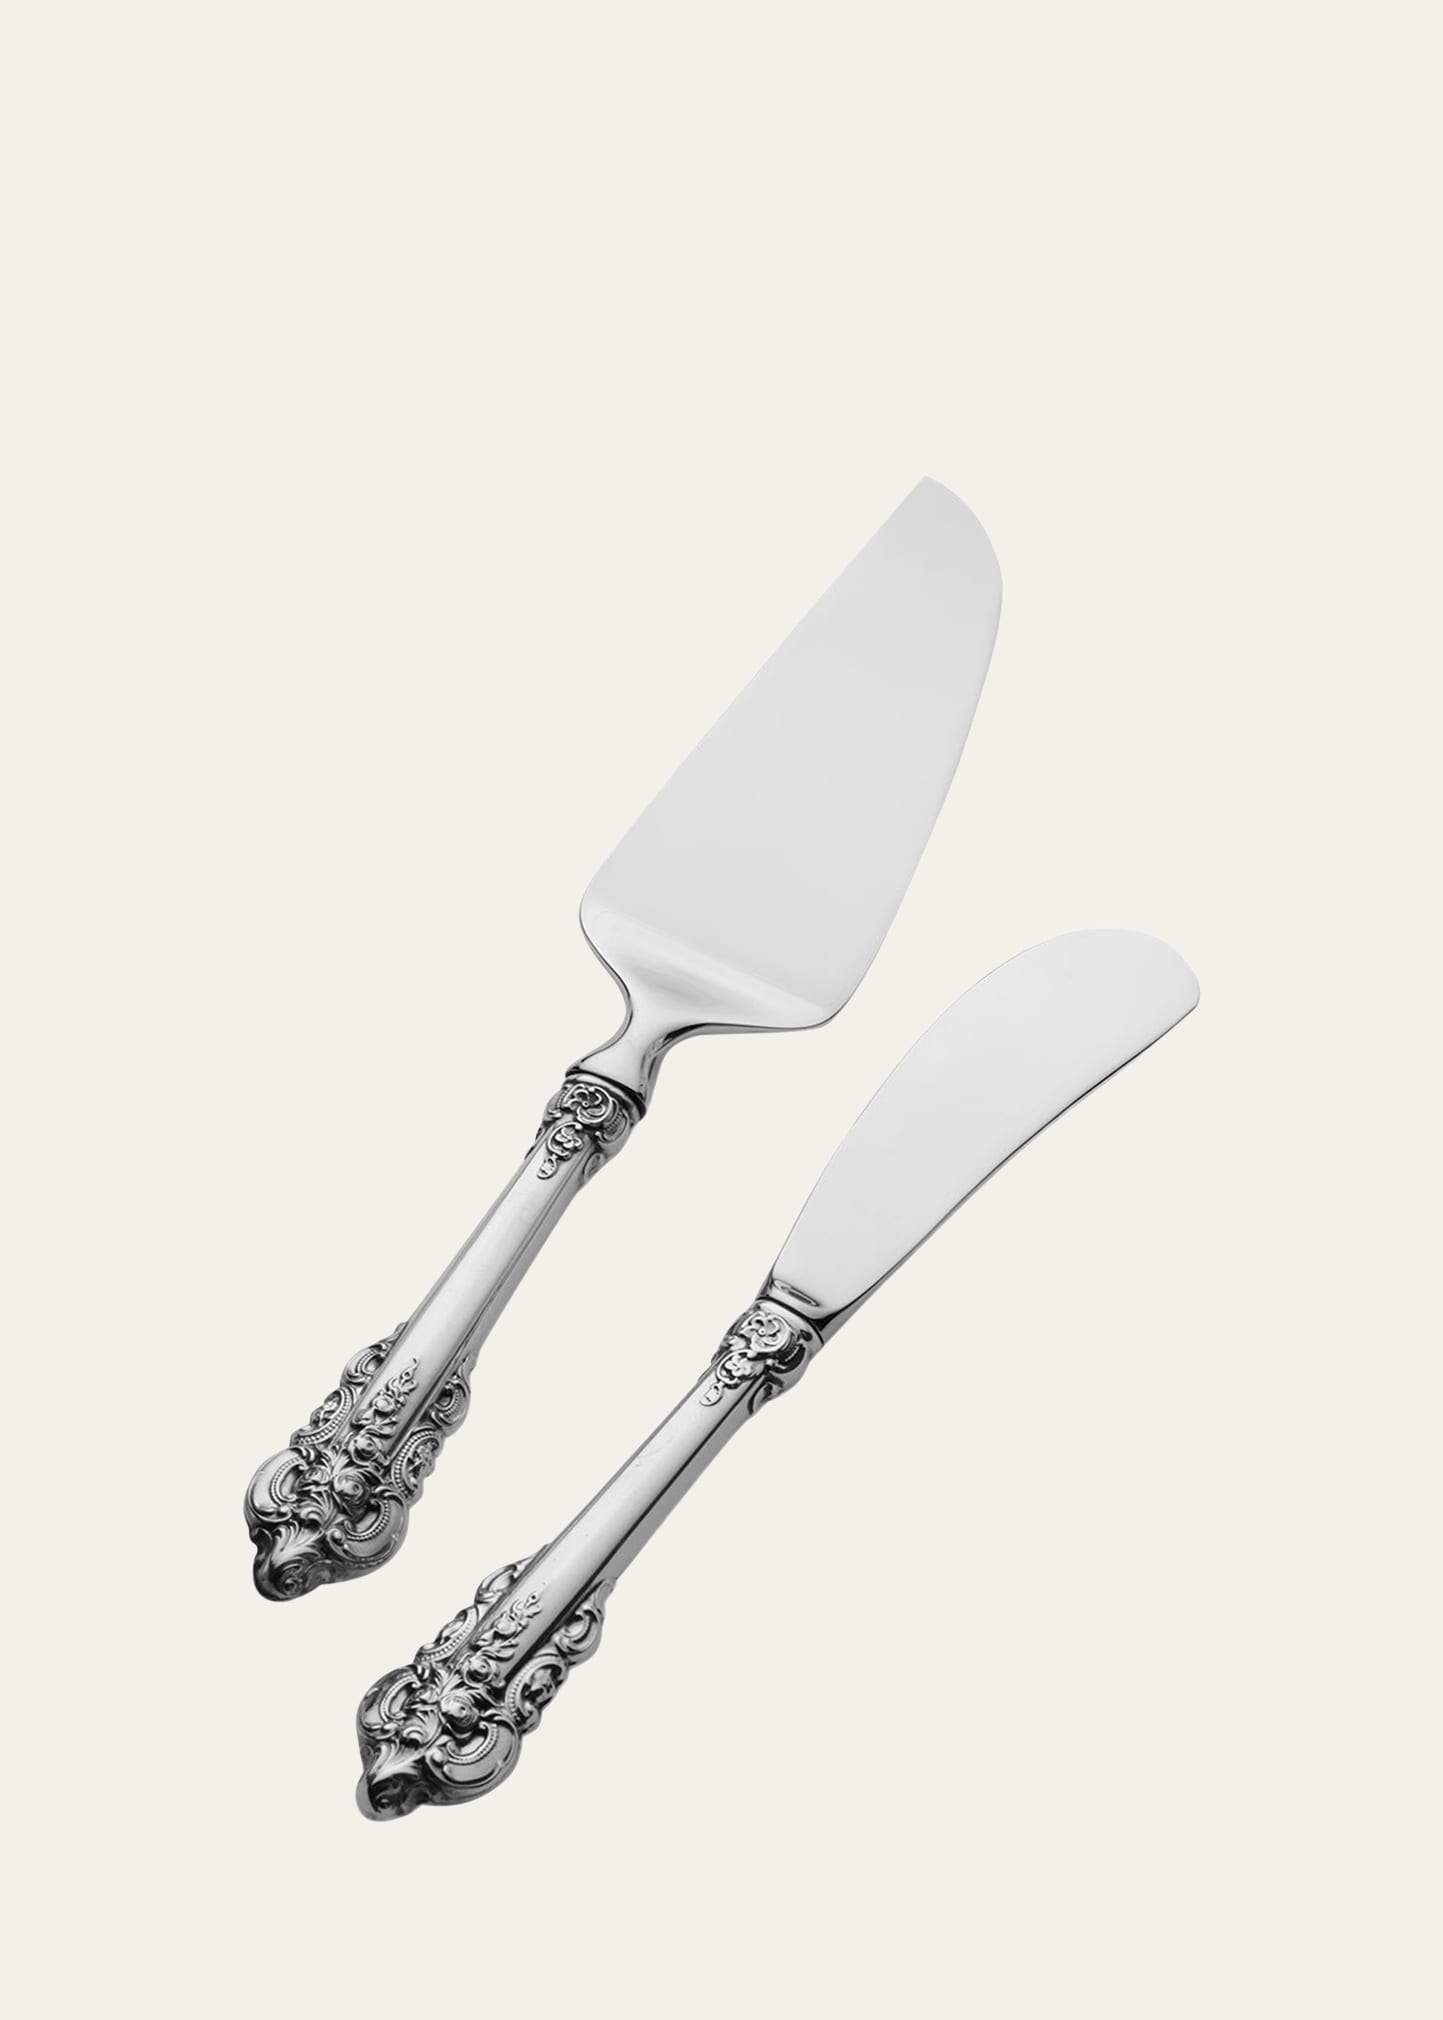 Grand Baroque 2-Piece Cheese Knife Set